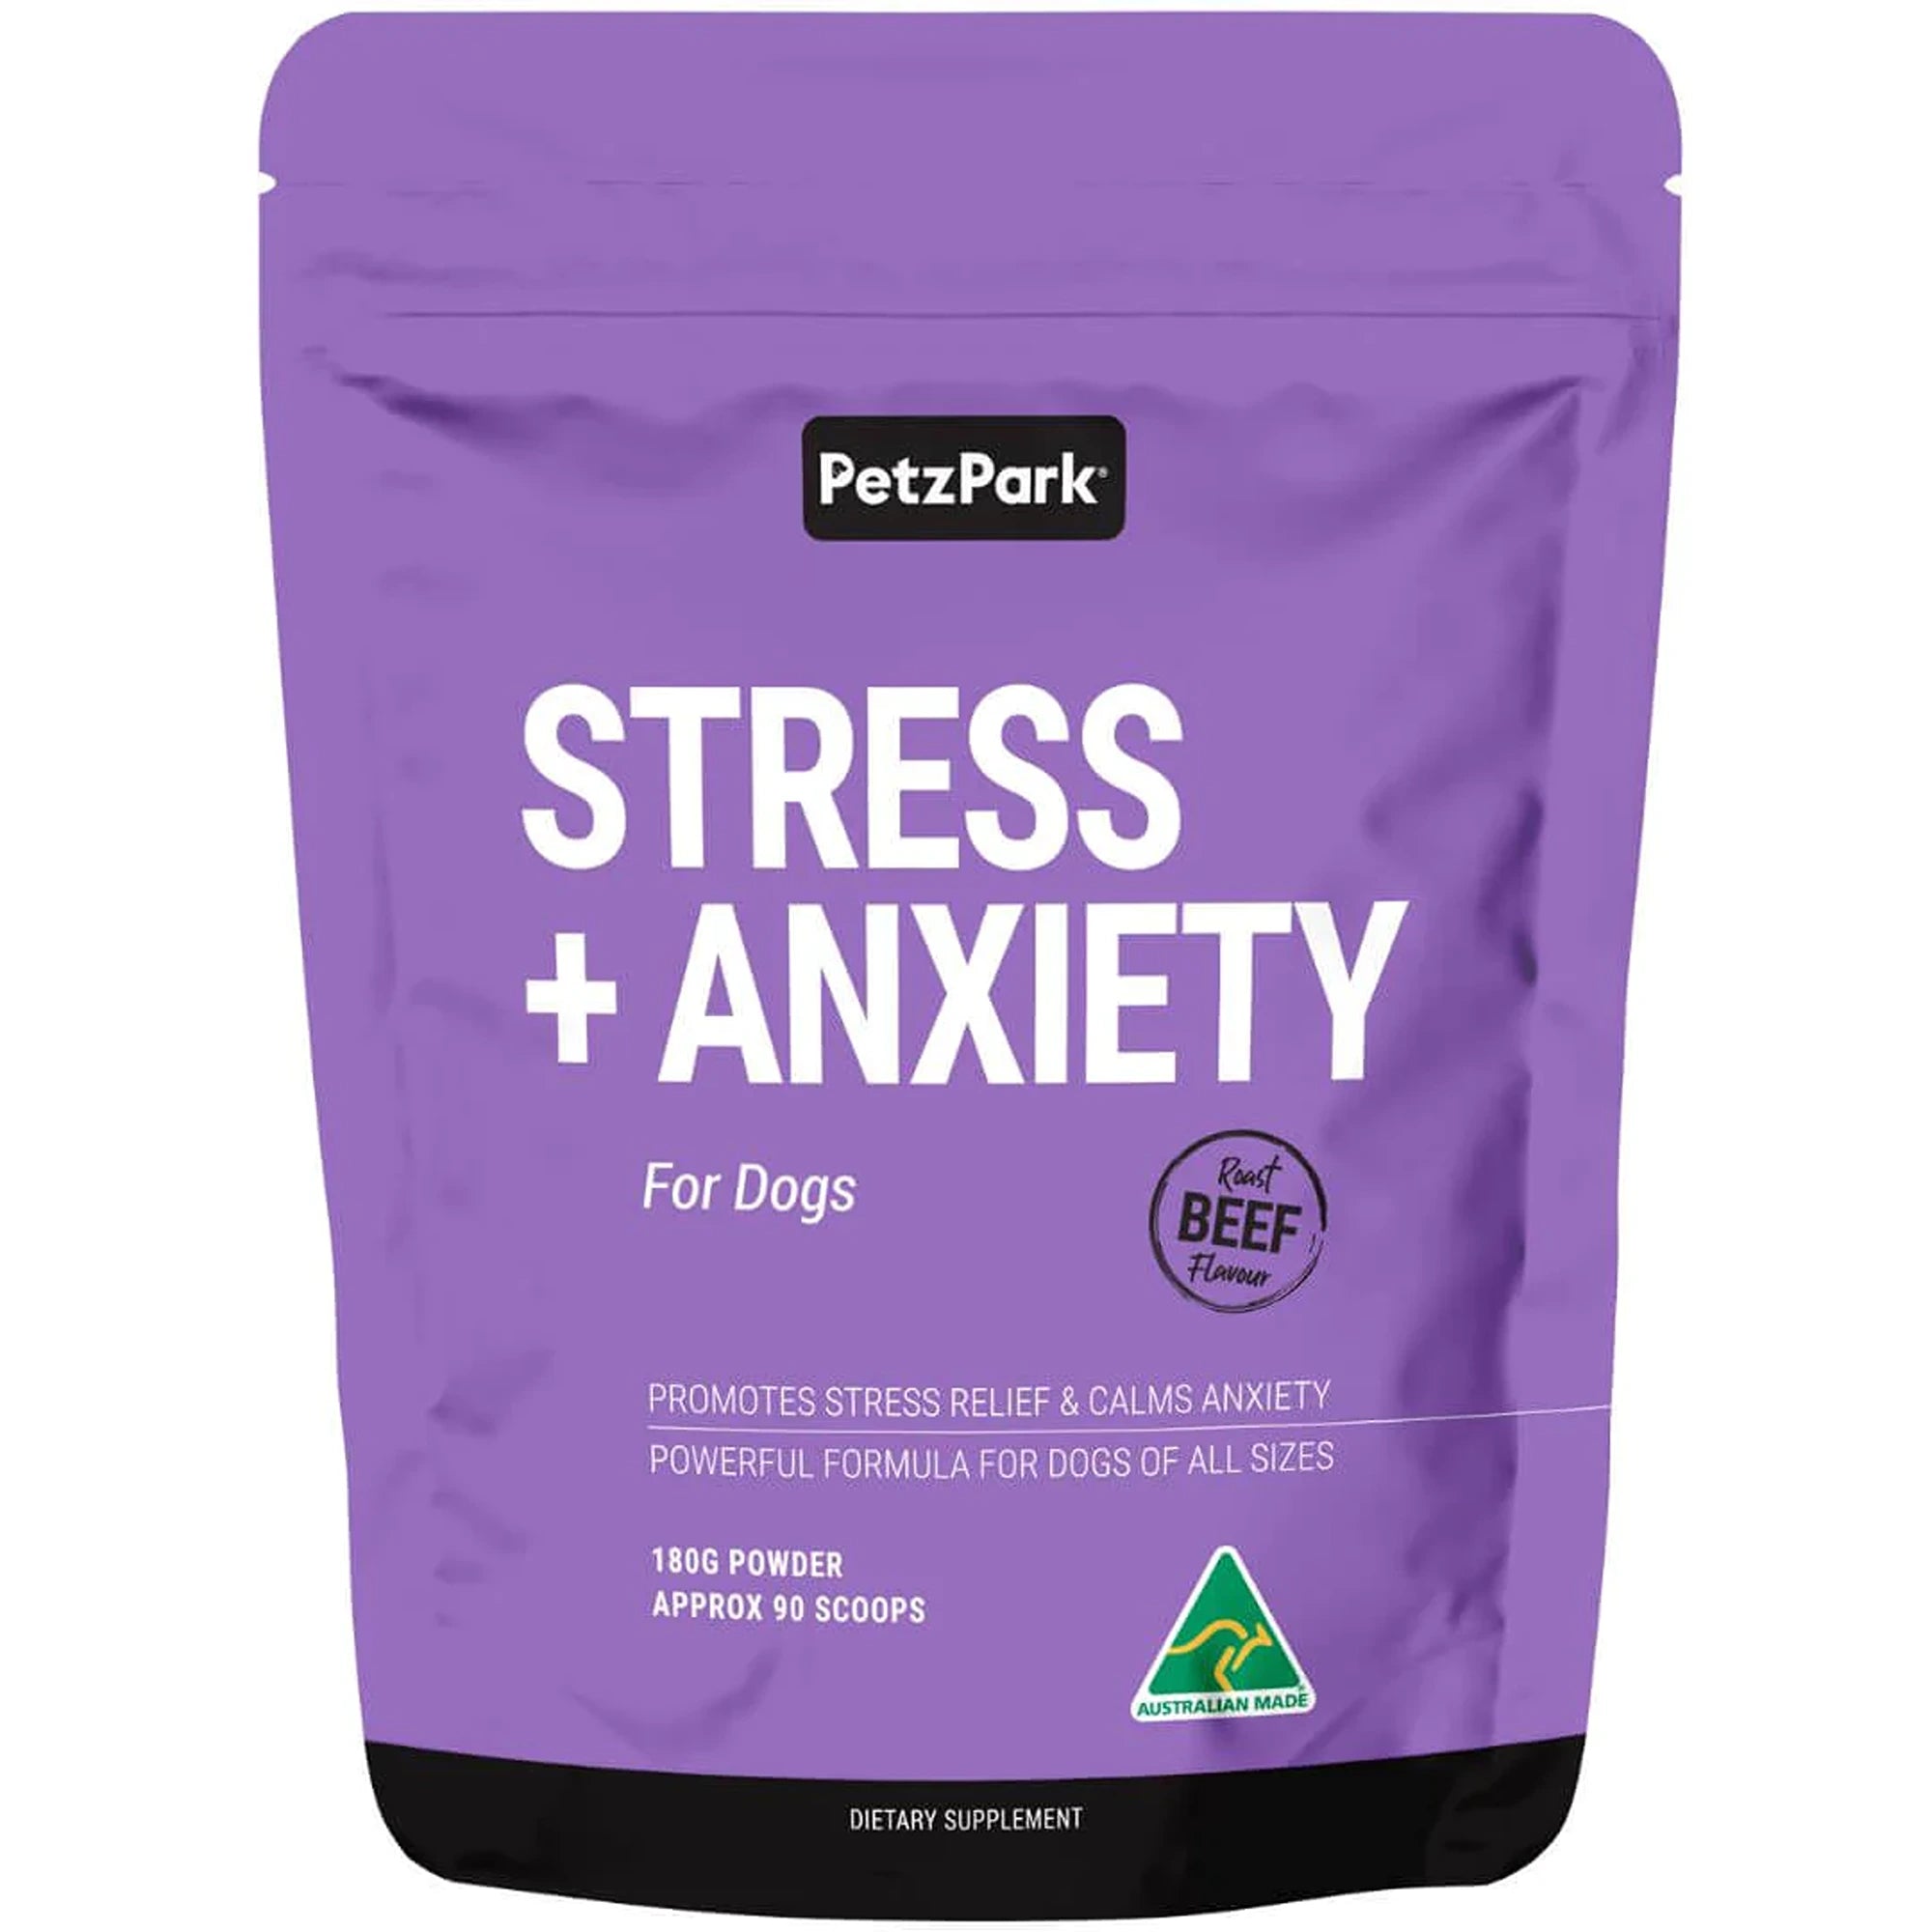 Petz Park Stress + Anxiety for Dogs 90 Scoops